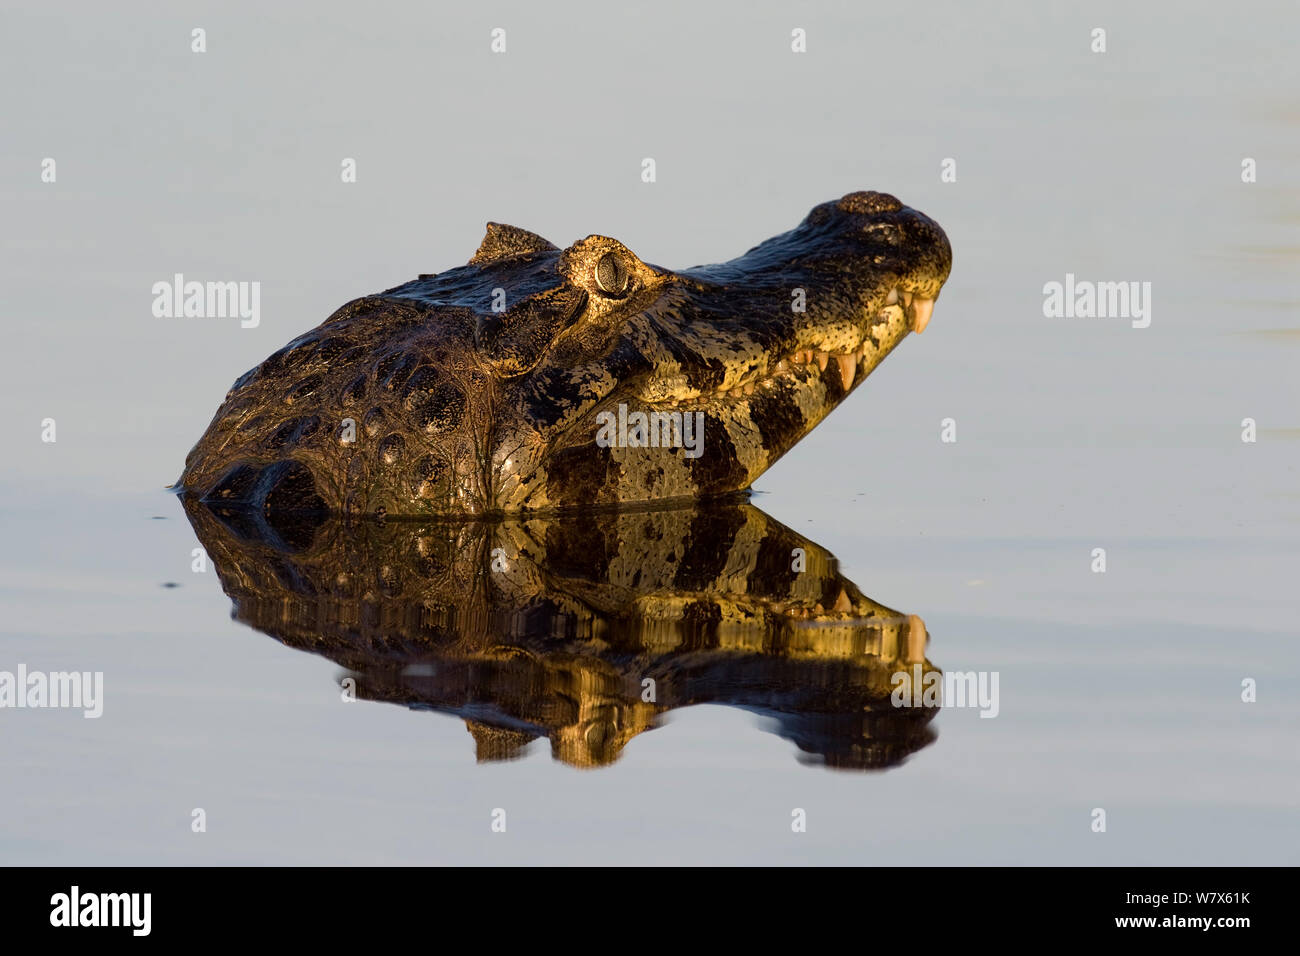 Spectacled caiman (Caiman crocodilus) reflected in water's surface, Mato Grosso, Pantanal, Brazil.  August. Stock Photo